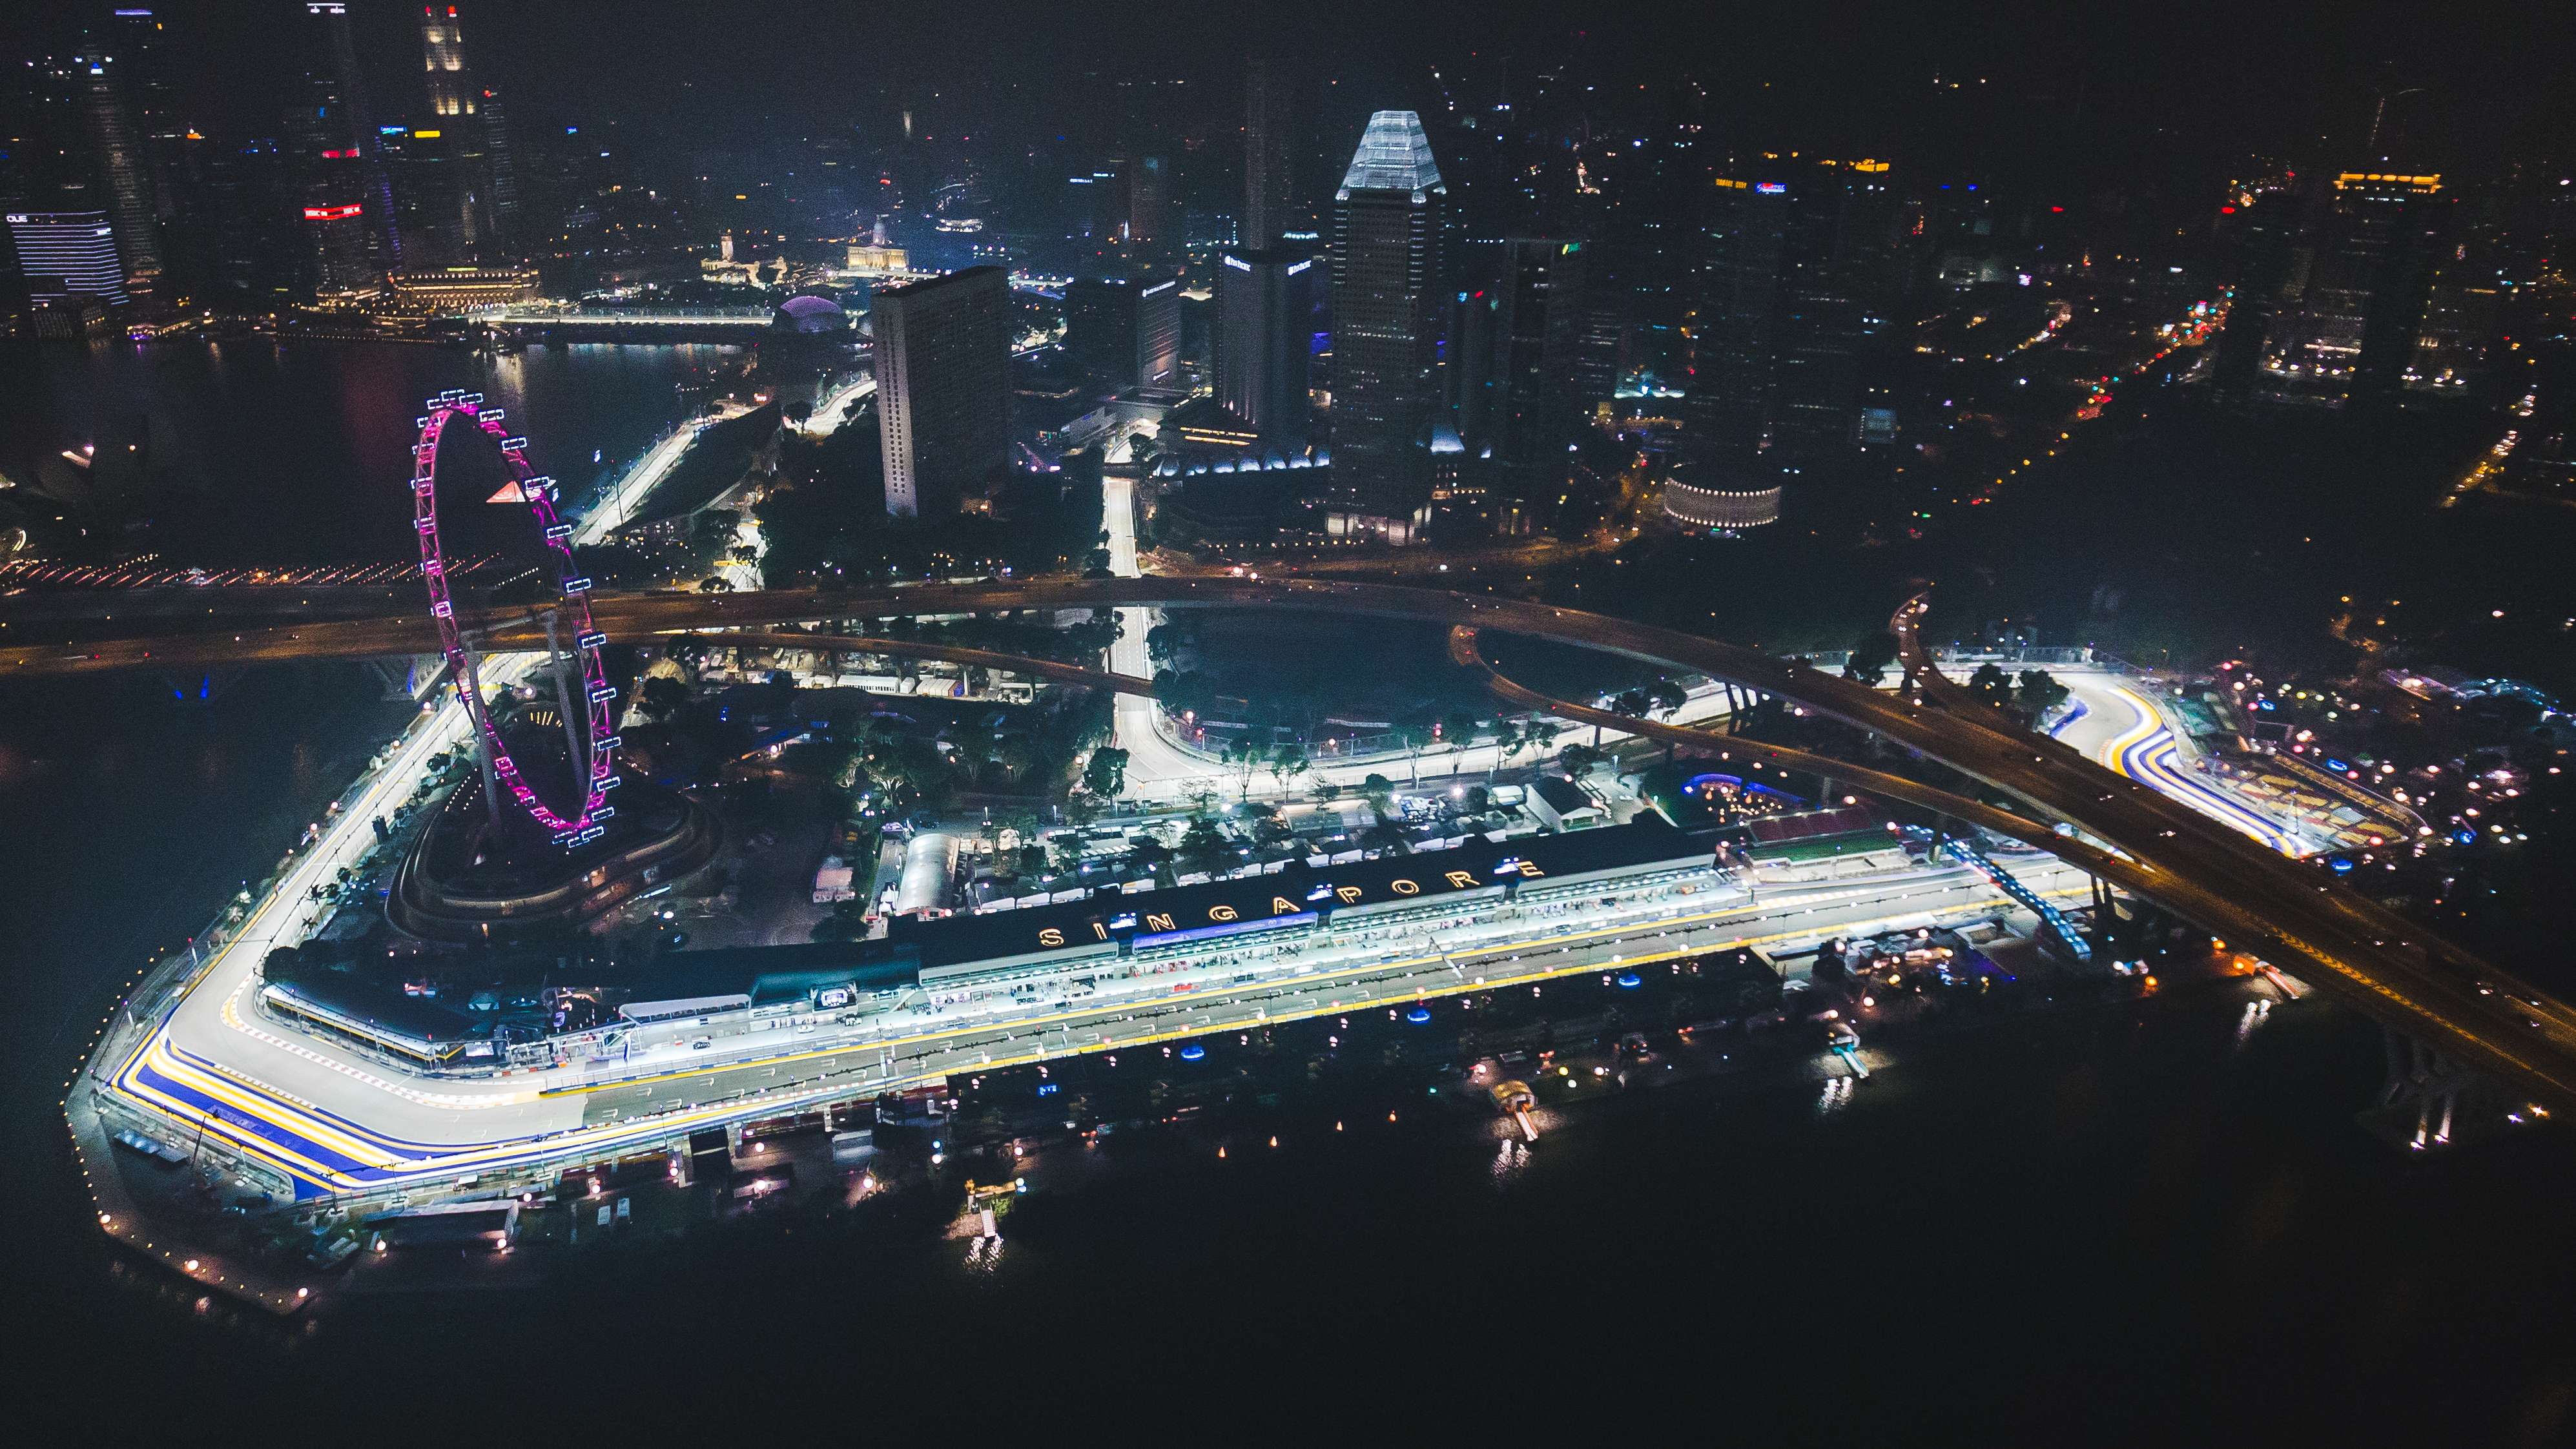 Marina Bay Street Circuit is the scene of thrilling race action and provides spectacular night views of the track illuminated against the backdrop of the Singapore skyline.